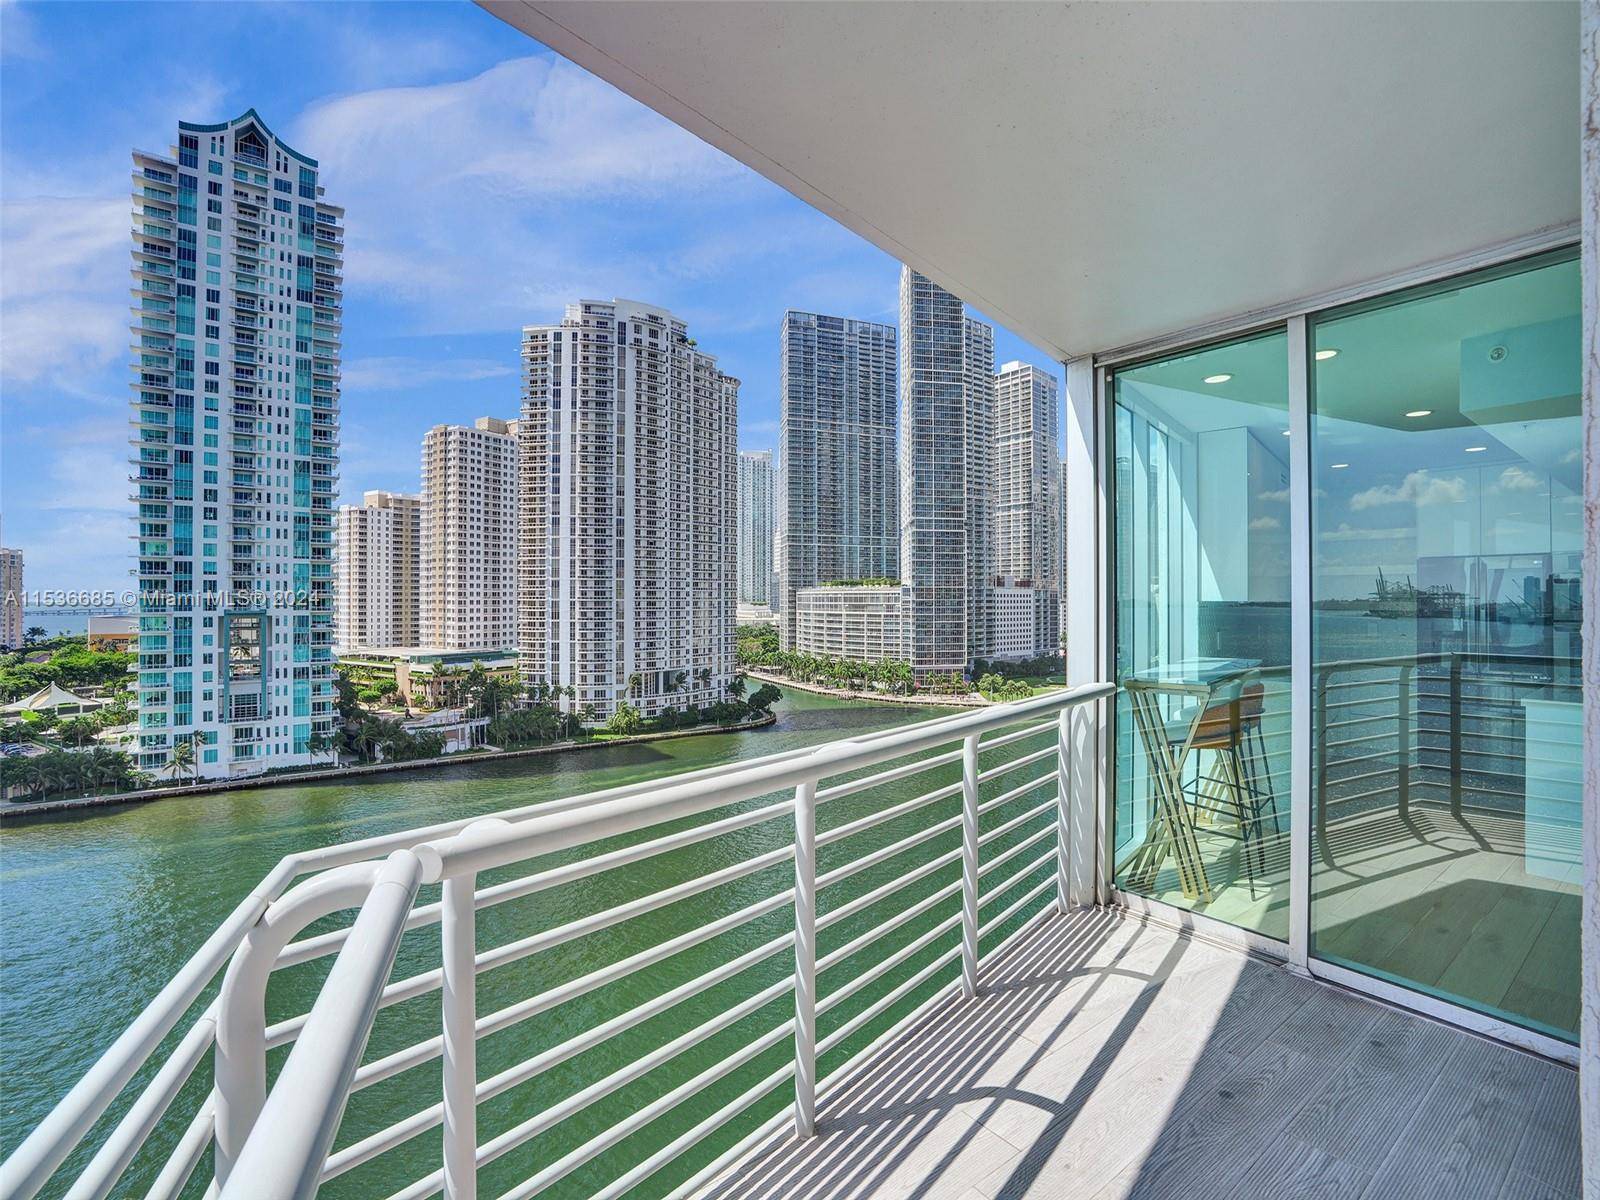 Enjoy luxury living in this elegantly renovated 3 bed, 2 bath condo with a large wraparound balcony overlooking the Ocean and Biscayne Bay !